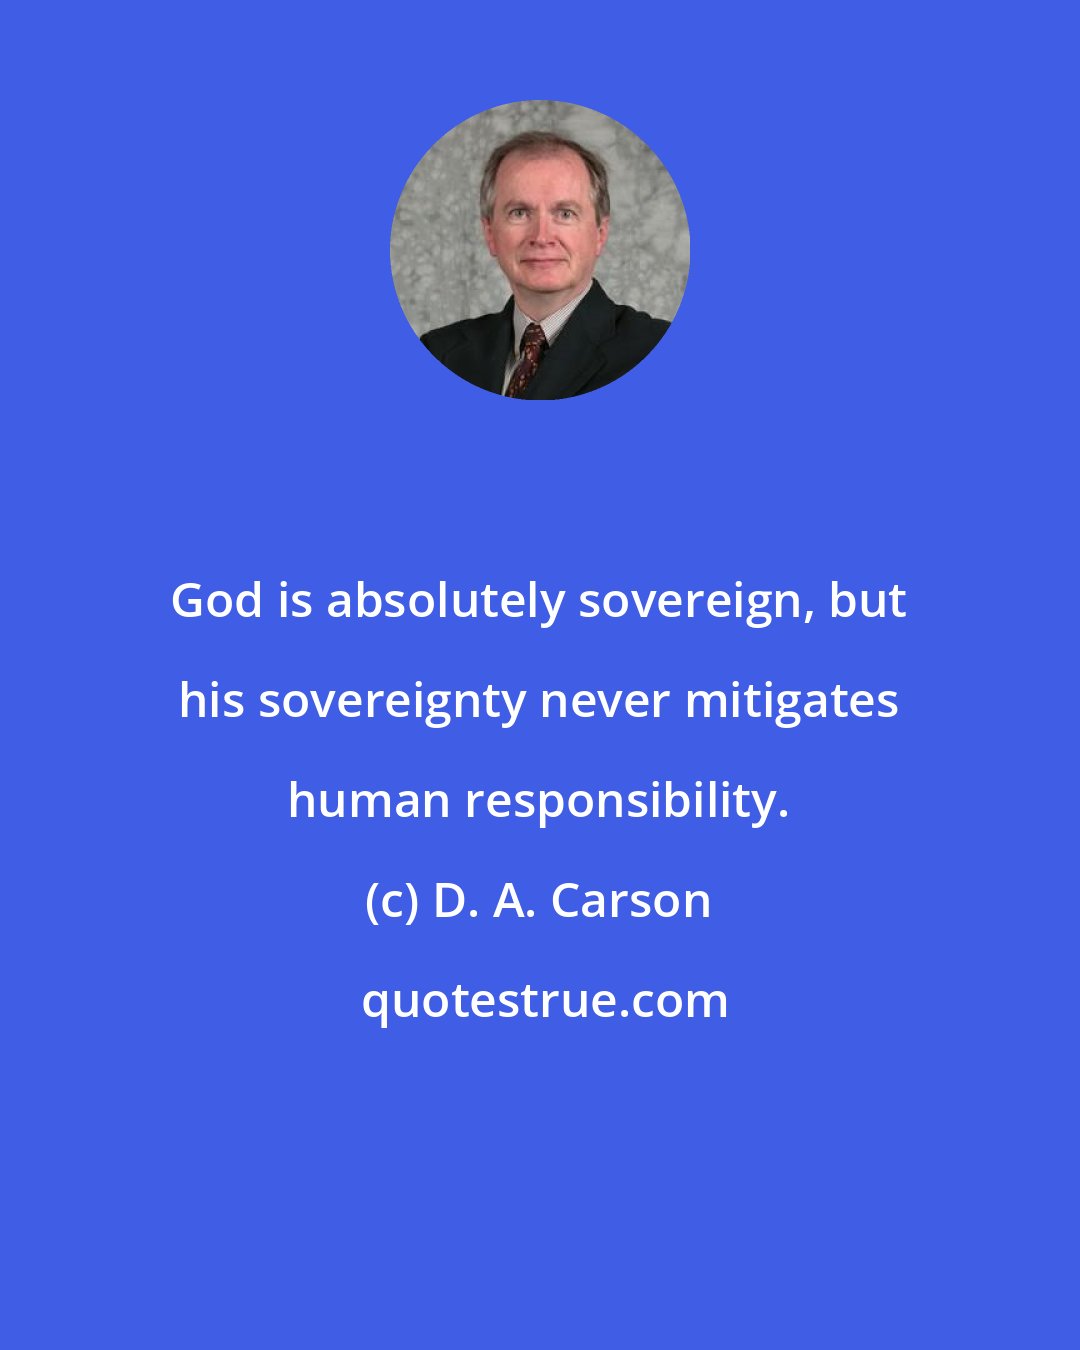 D. A. Carson: God is absolutely sovereign, but his sovereignty never mitigates human responsibility.